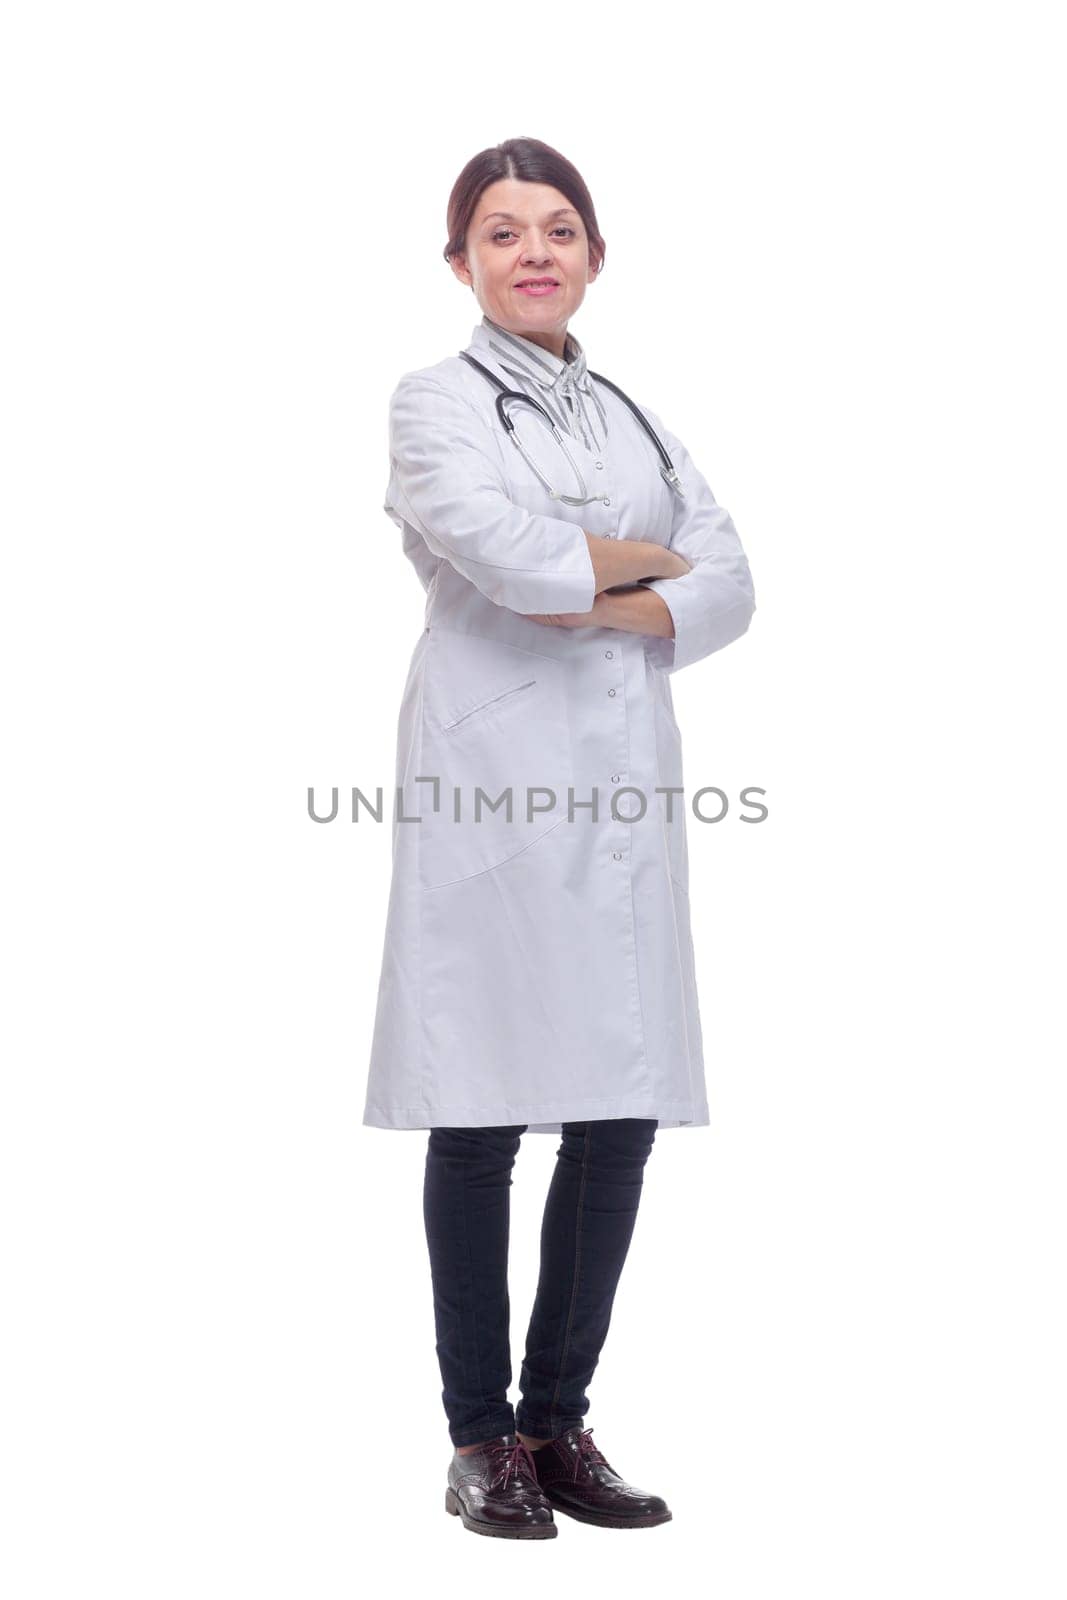 Portrait of woman doctor with white coat crossing arms and stethoscope around the neck